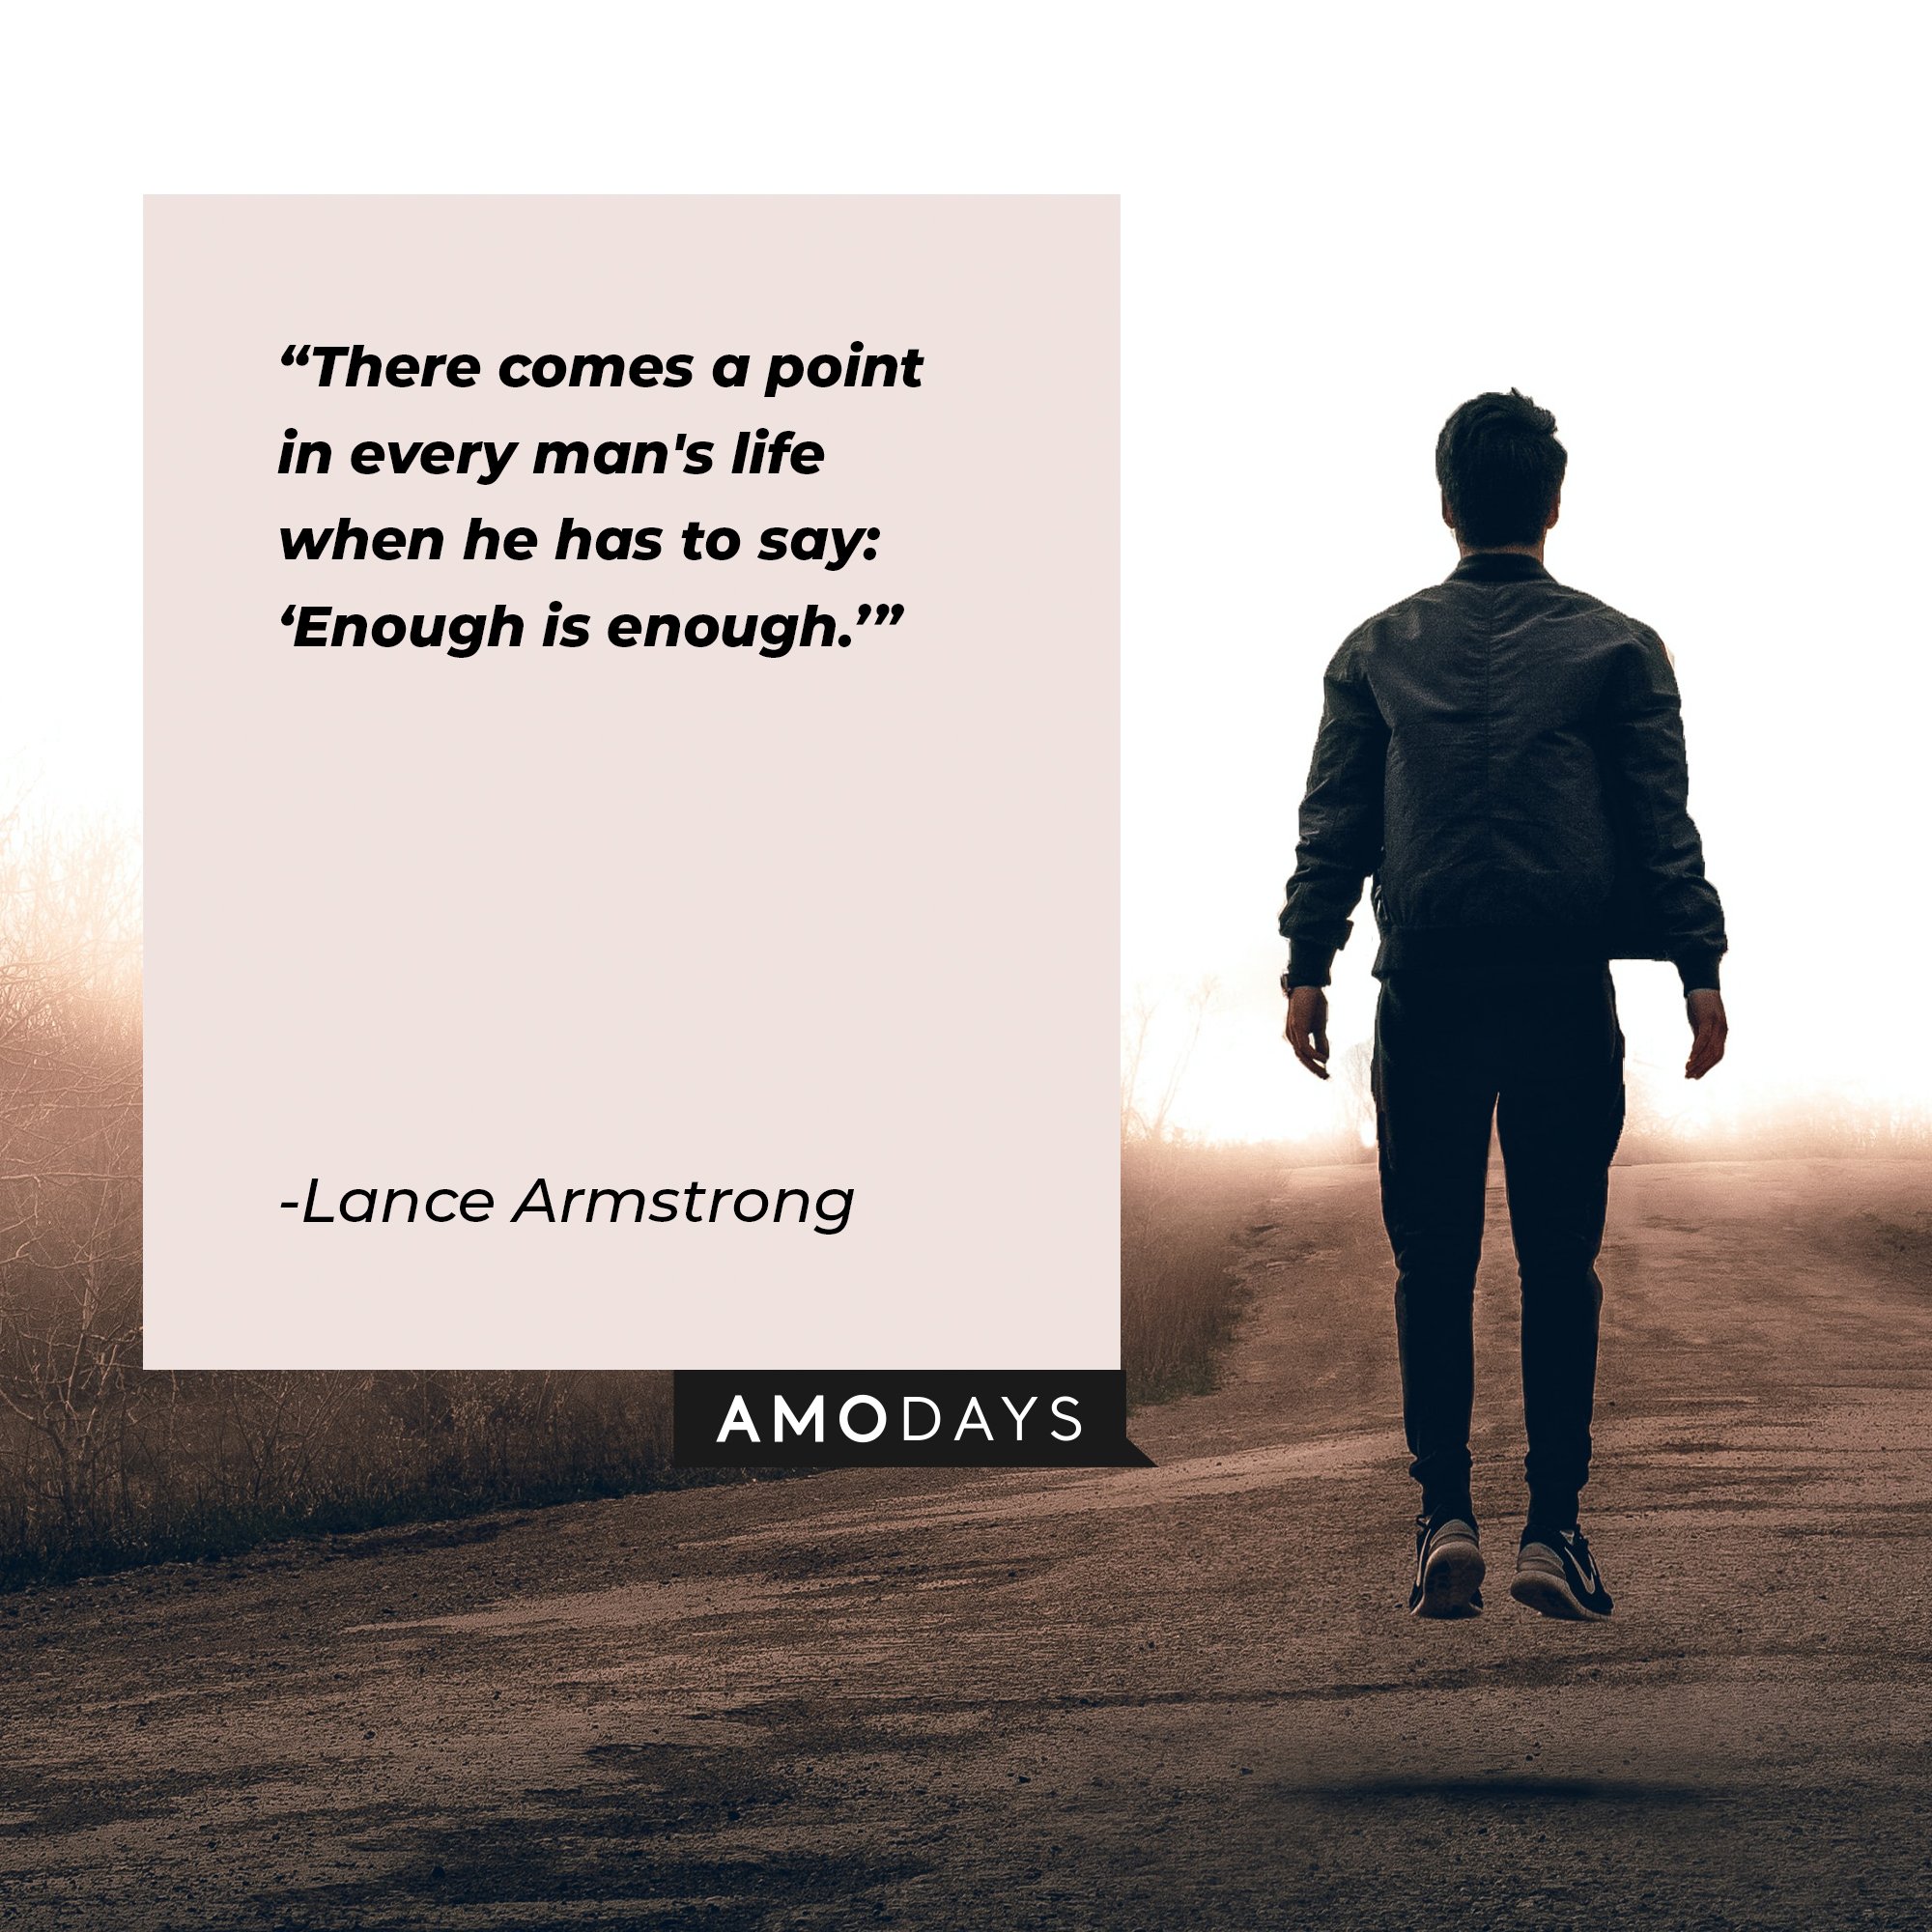 Lance Armstrong’s quote: “There comes a point in every man's life when he has to say: 'Enough is enough.’” | Image: AmoDays 